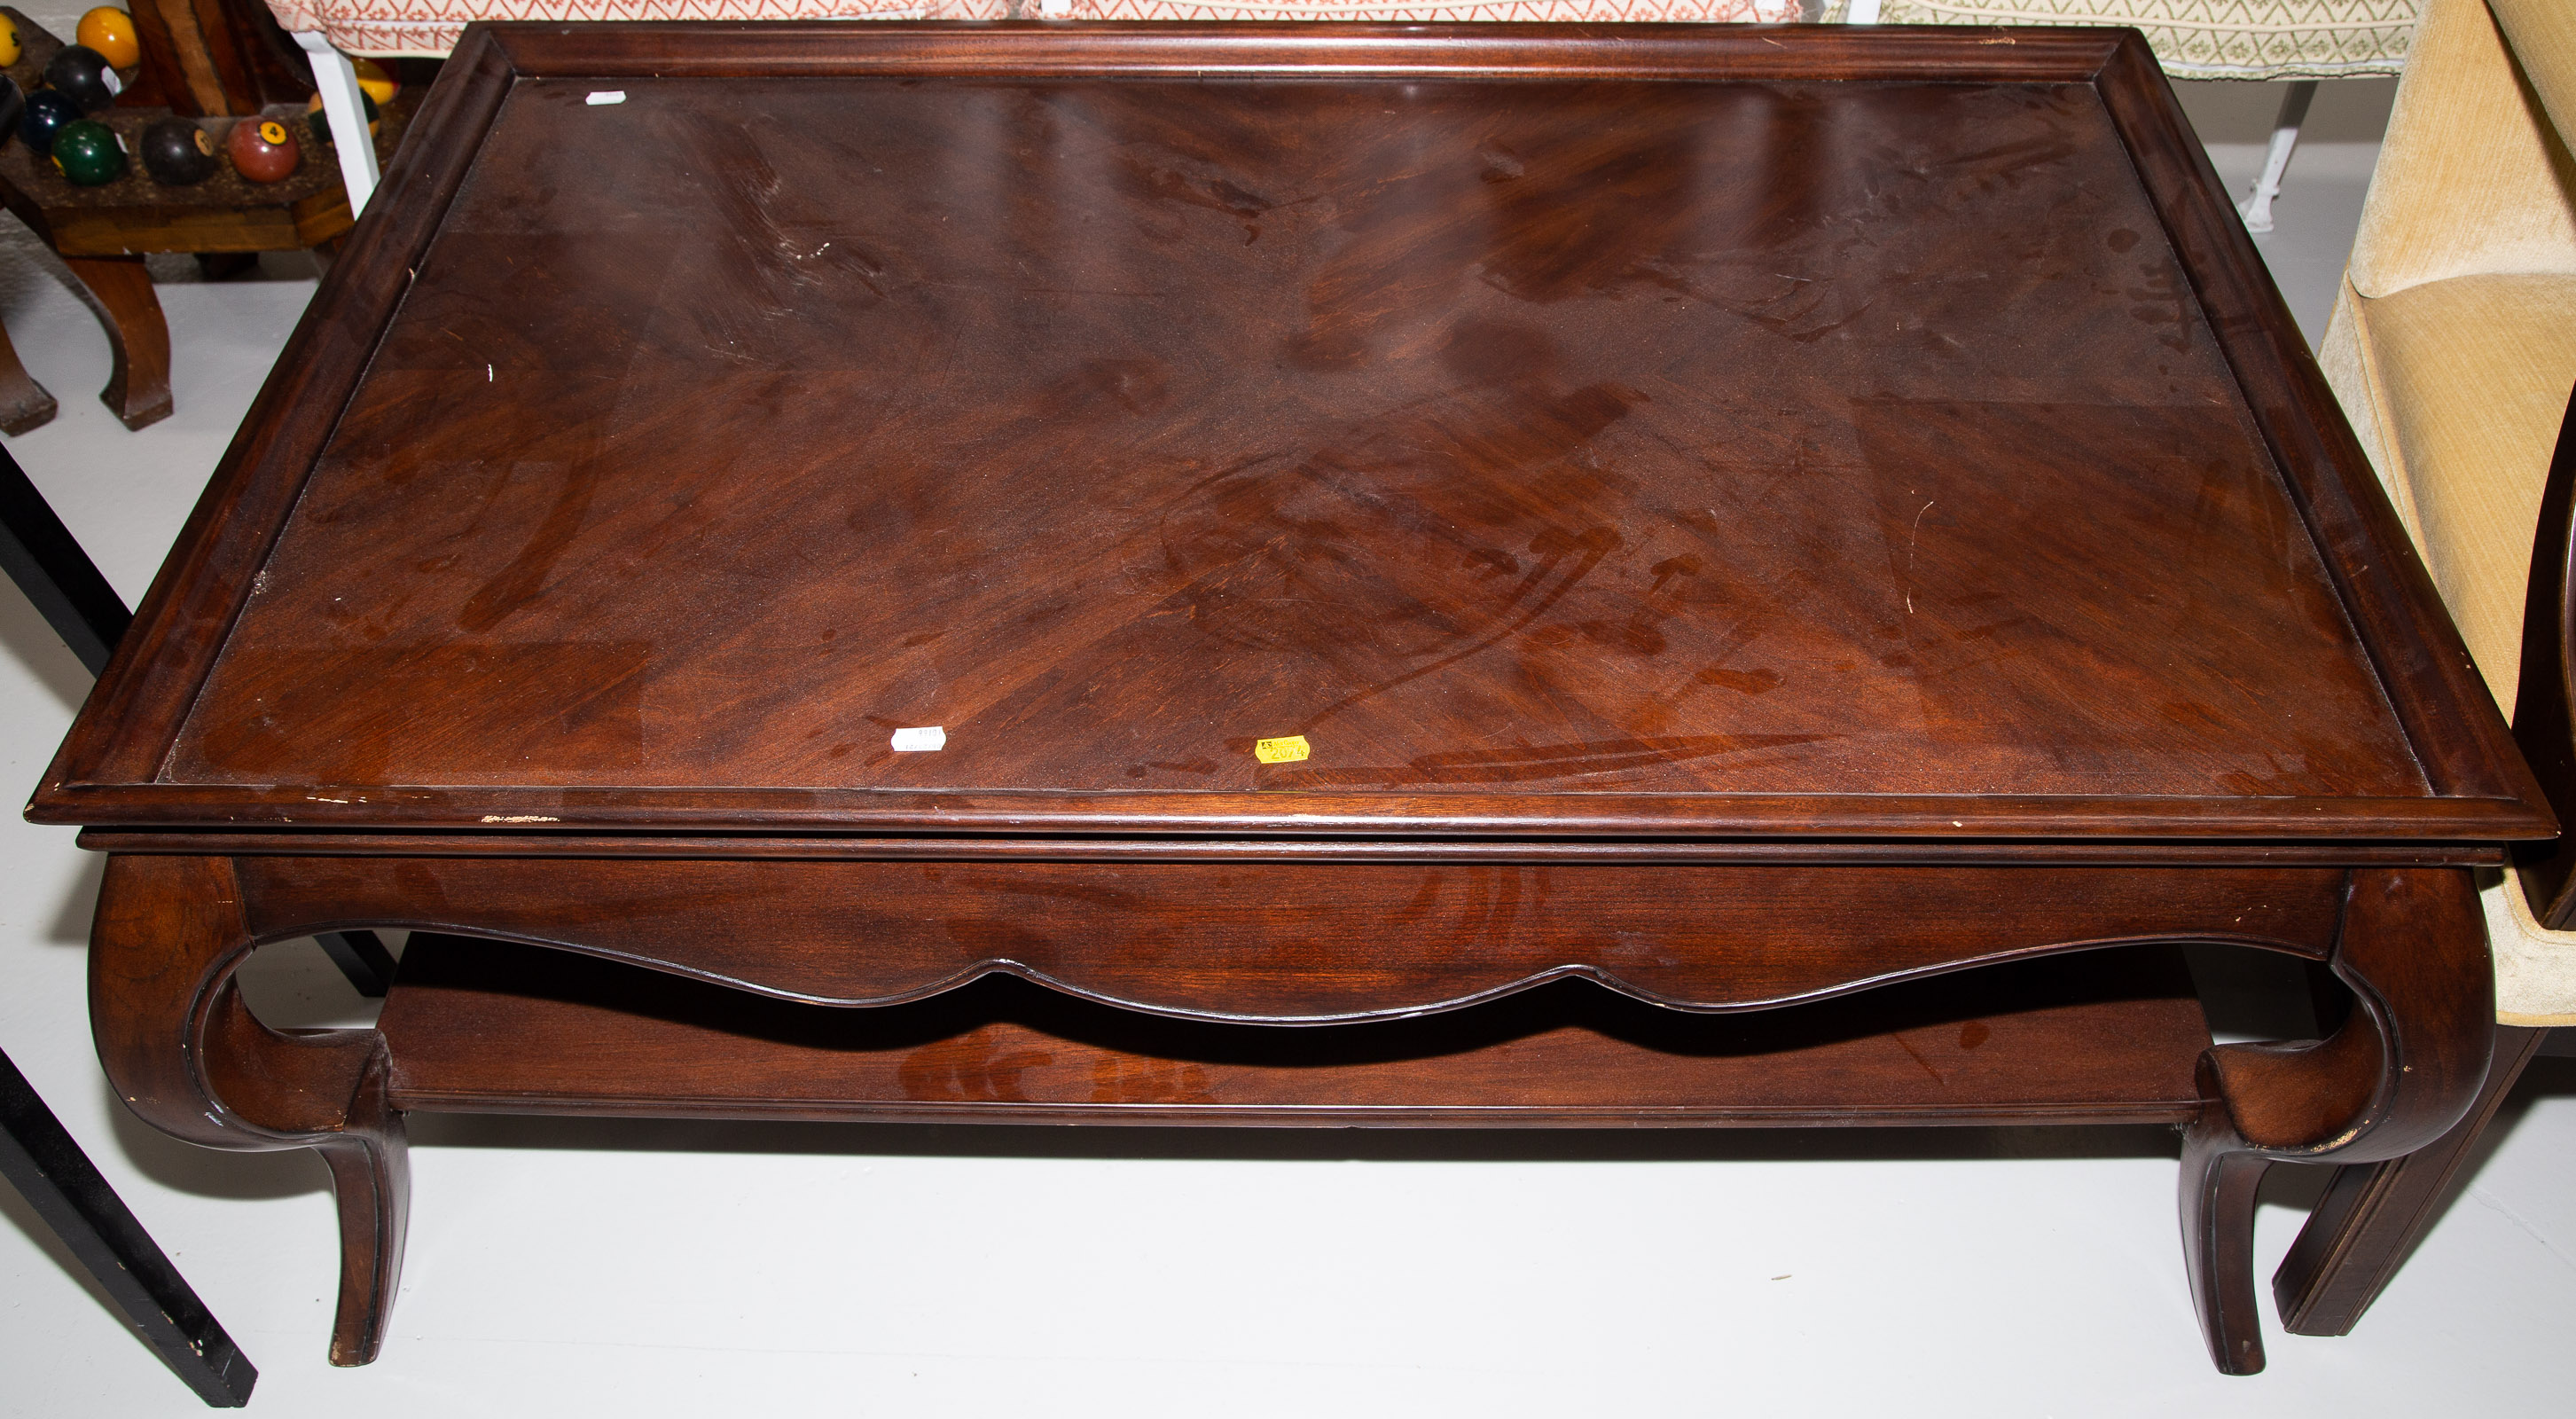 LARGE MAHOGANY COFFEE TABLE Approximately 3350bb